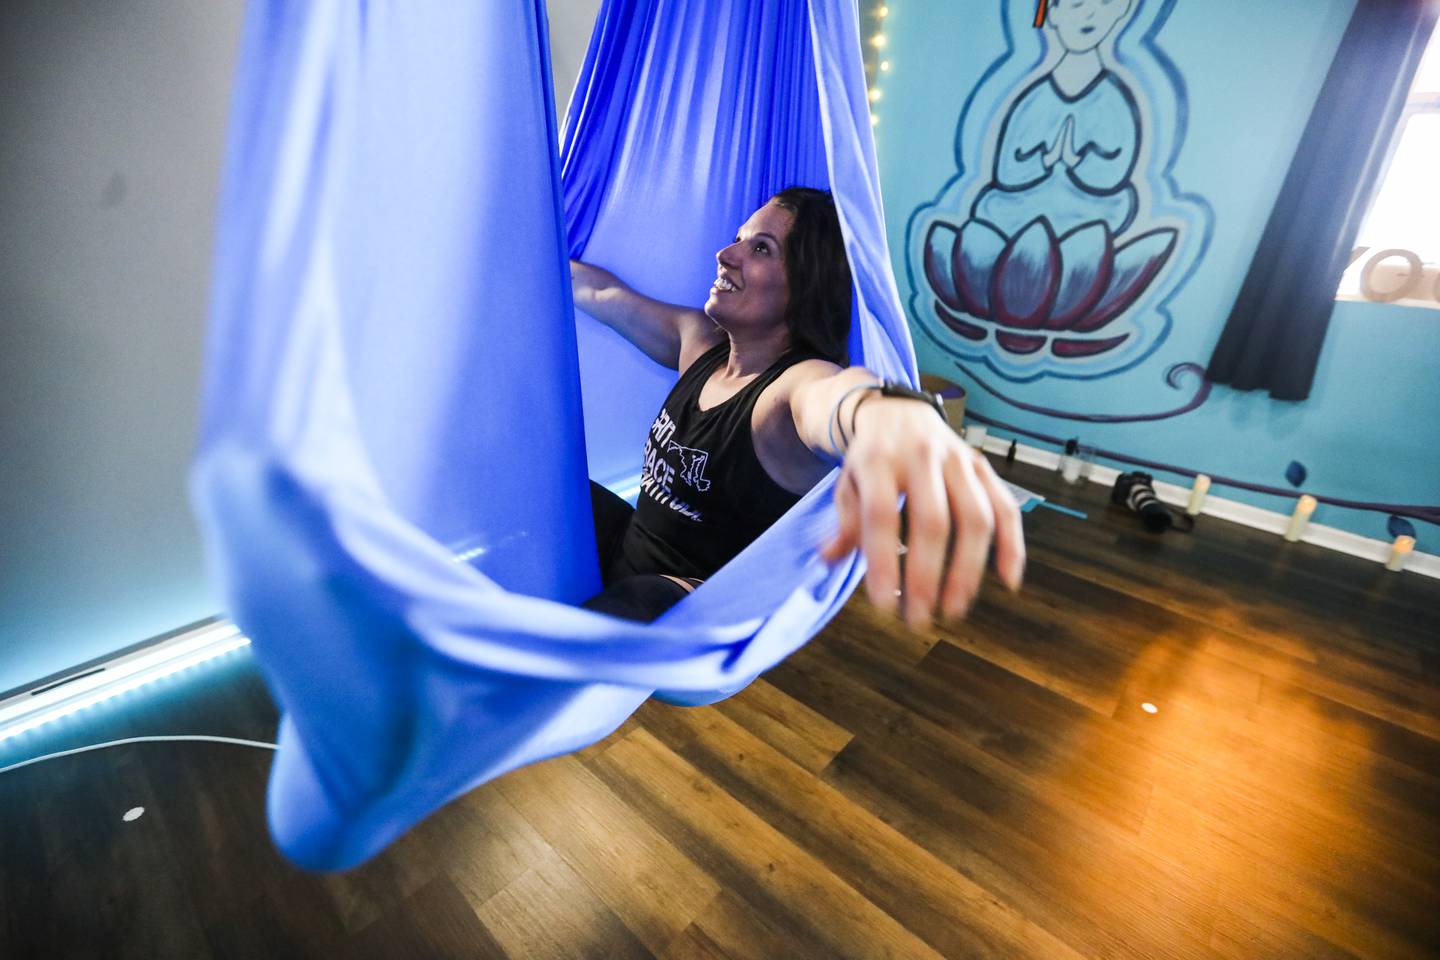 An aerial yoga class takes place at Break Away Yoga with owner Jenn Lucas in Parkville, MD on July 6, 2022.